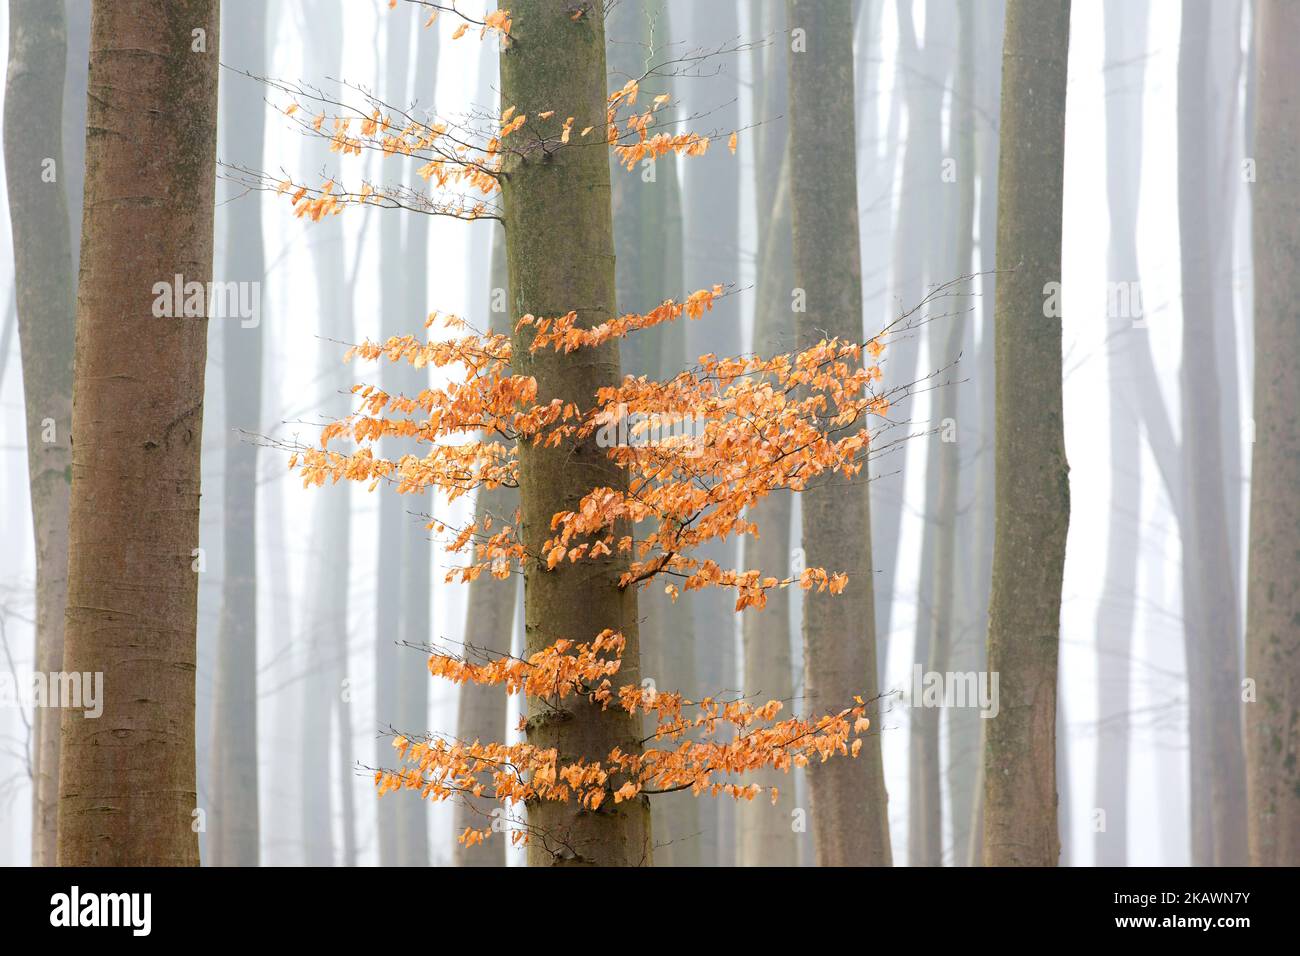 European beech trees / common beeches (Fagus sylvatica), tree trunks with autumn leaves in forest covered in early morning mist in winter Stock Photo